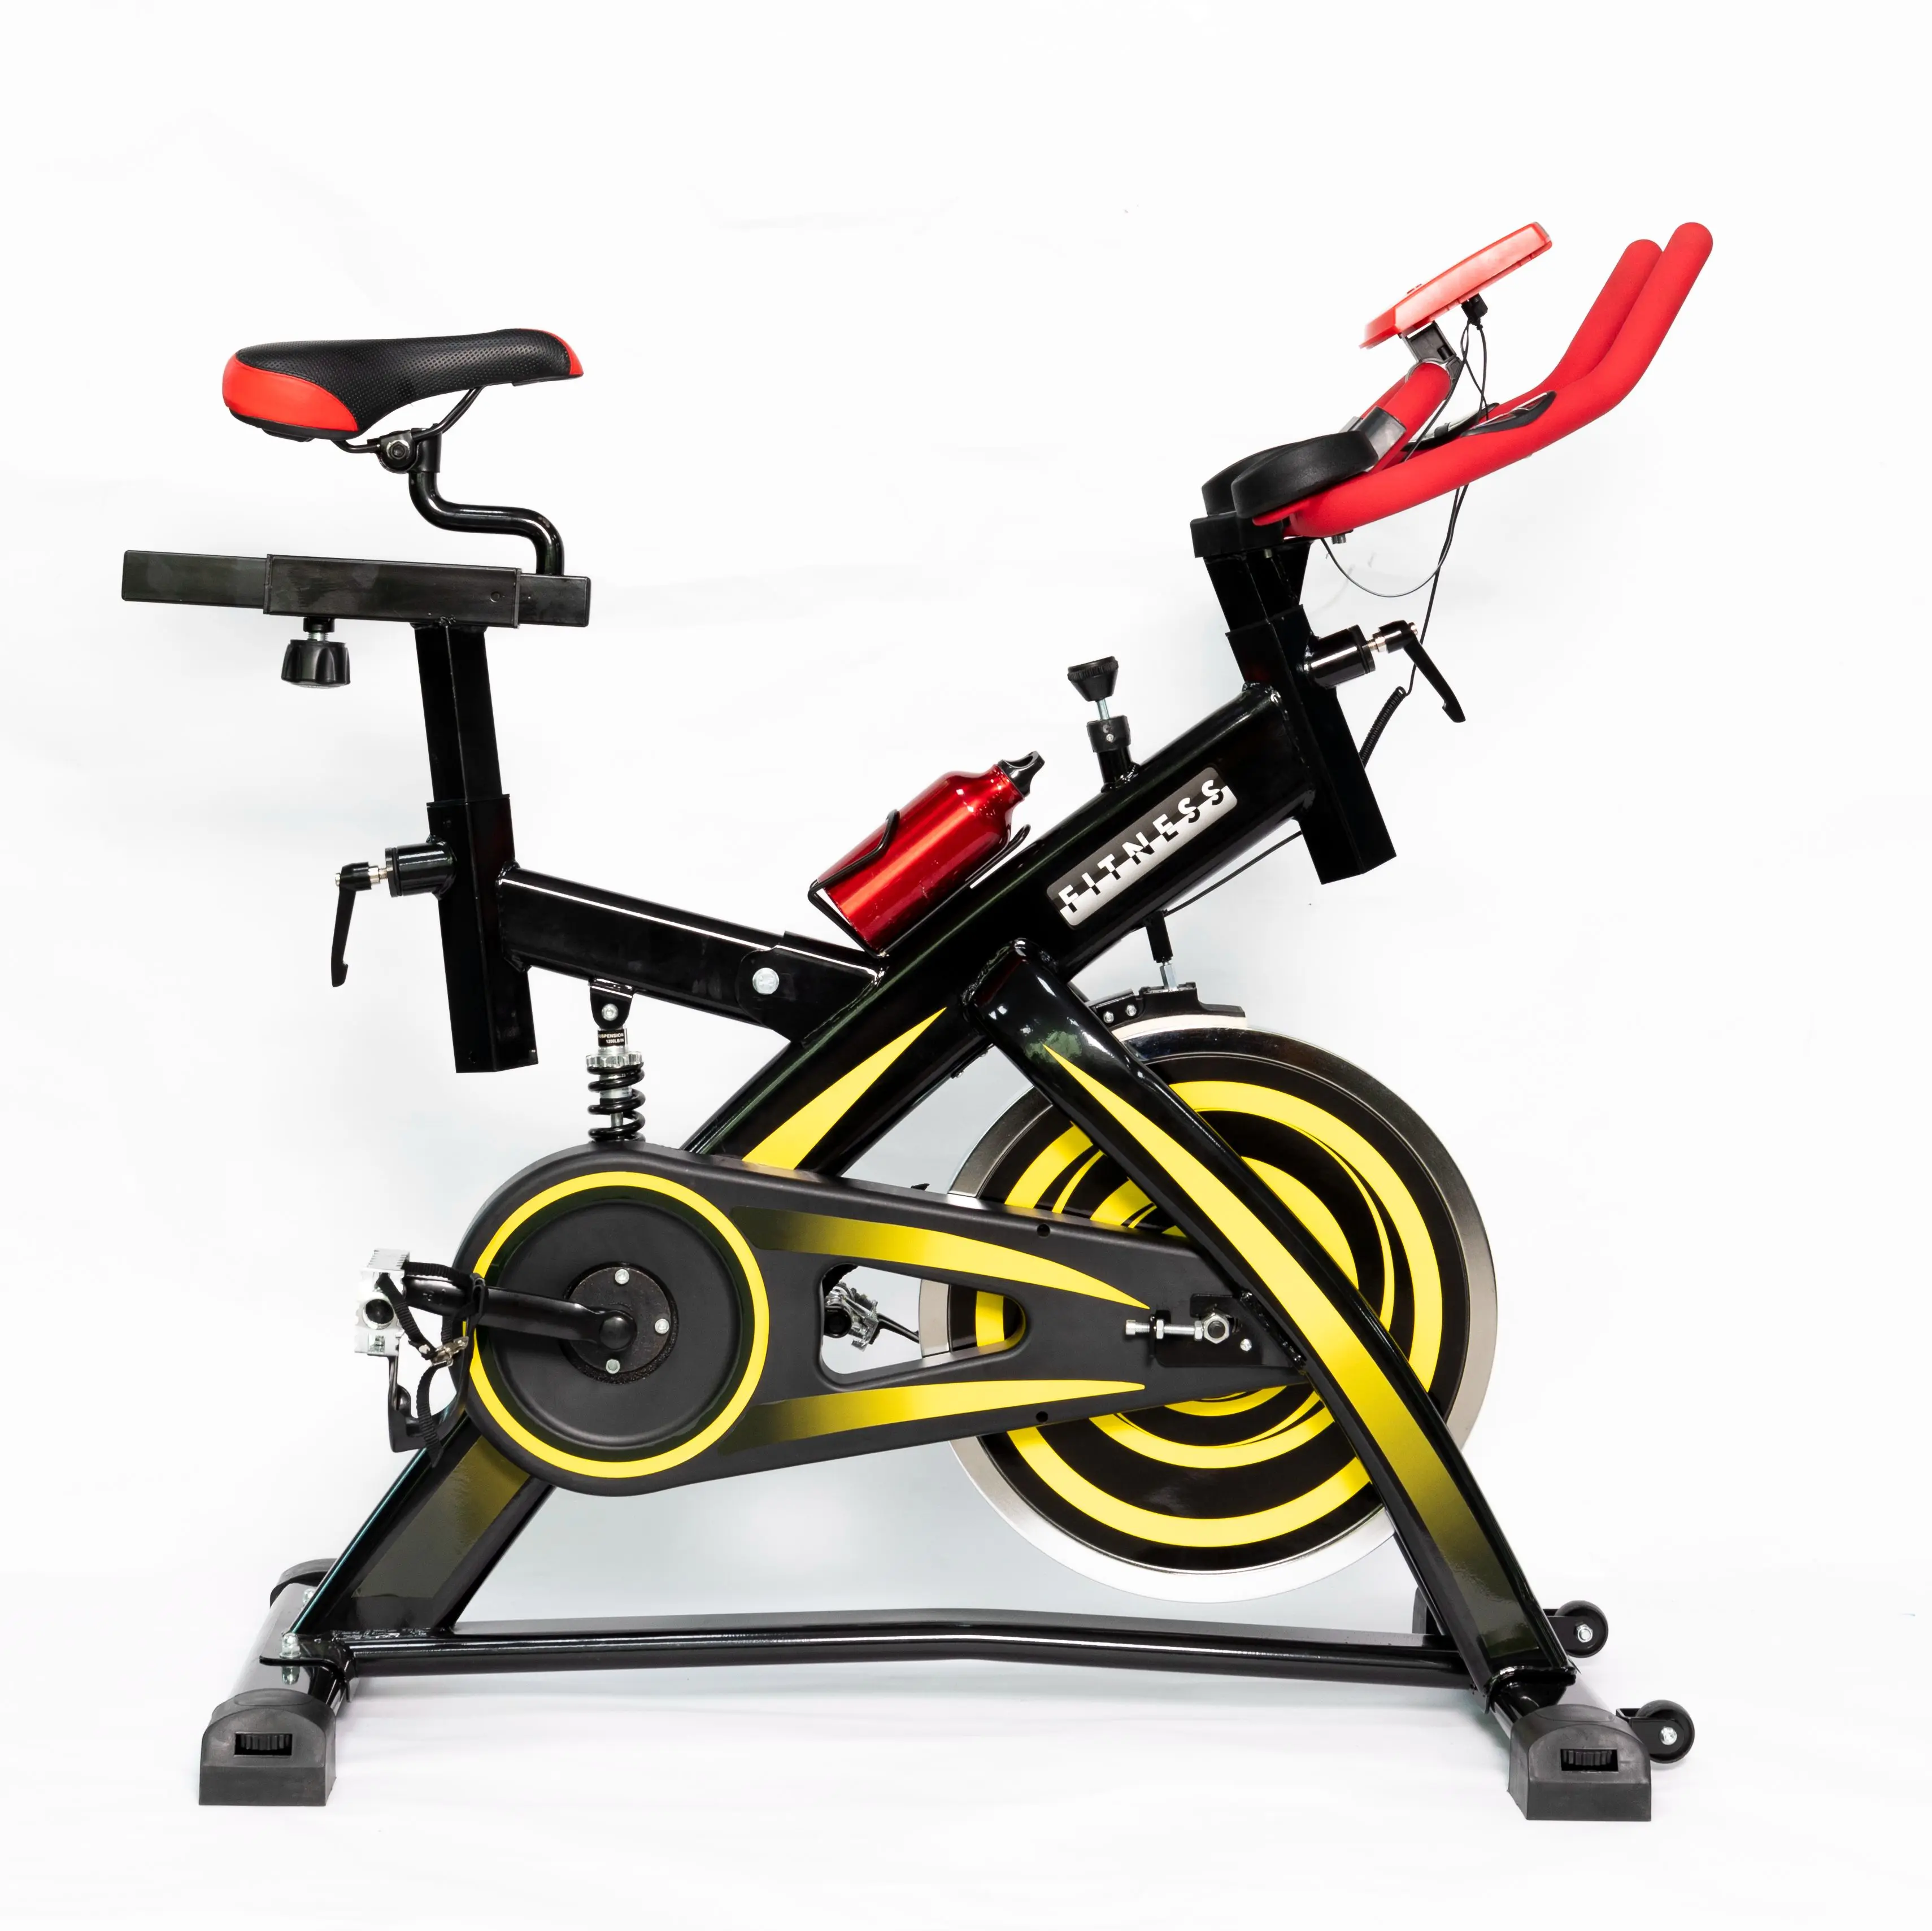 

Exercise Bike Stationary Indoor Cycling Bike for Home Cardio Gym Belt Drive Workout Bike with 48 LBS Flywheel, Red+black/yellow+black